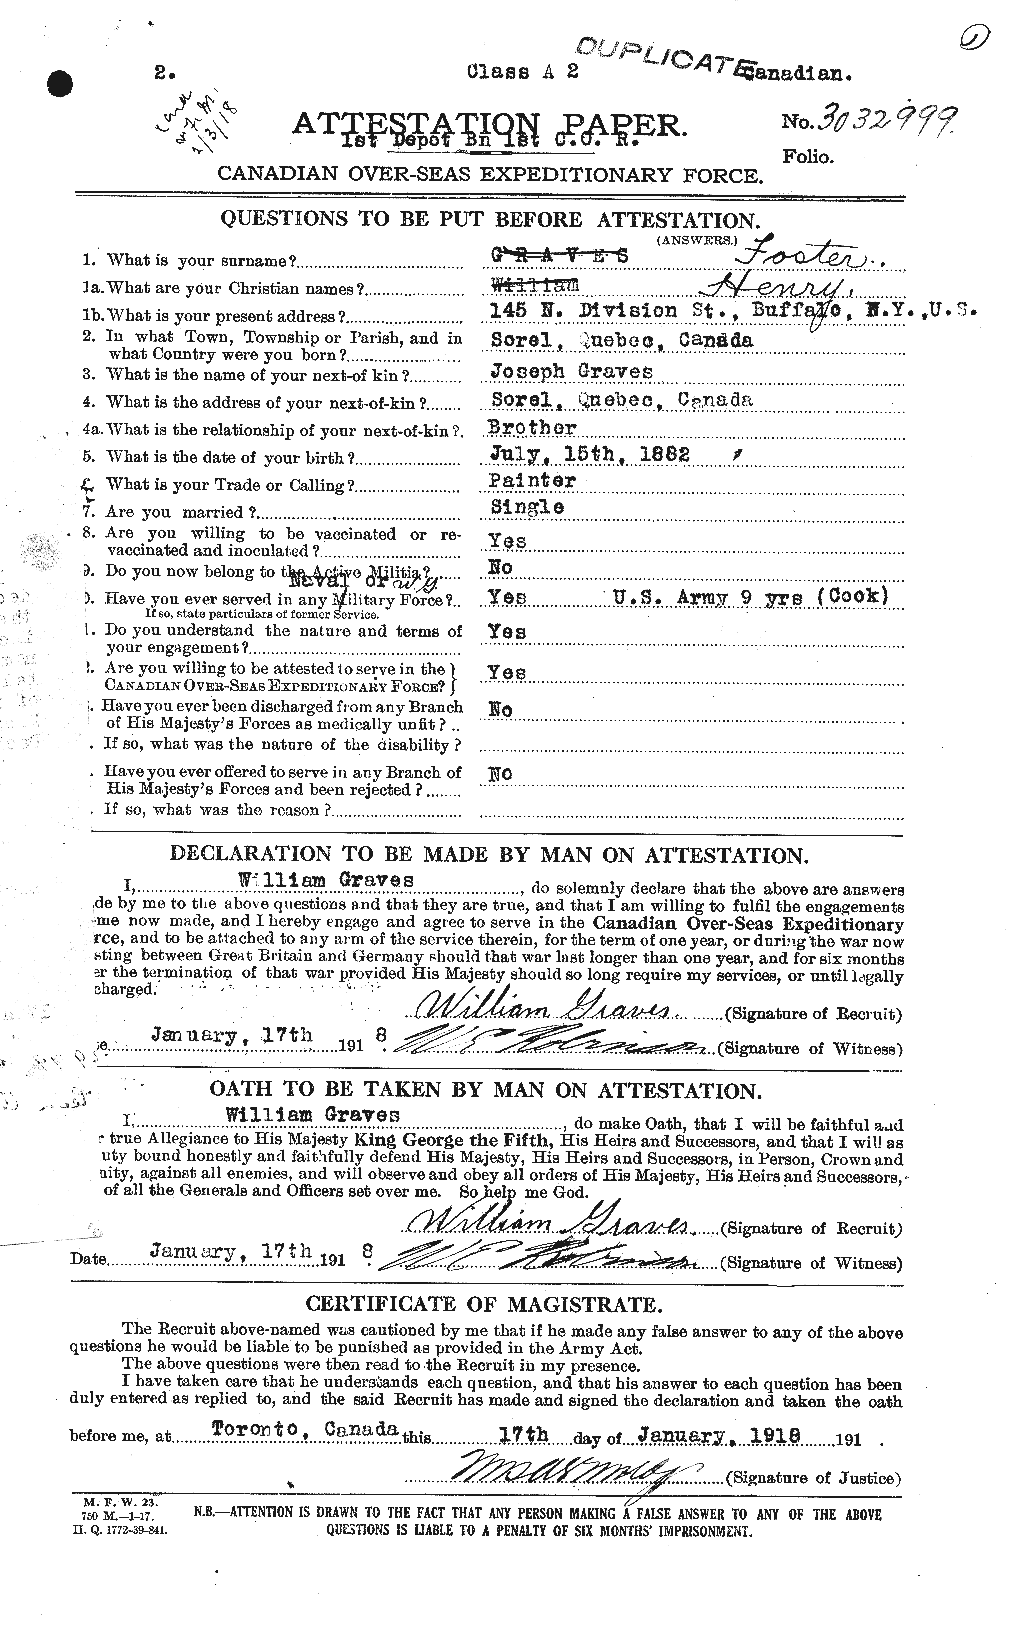 Personnel Records of the First World War - CEF 333239a